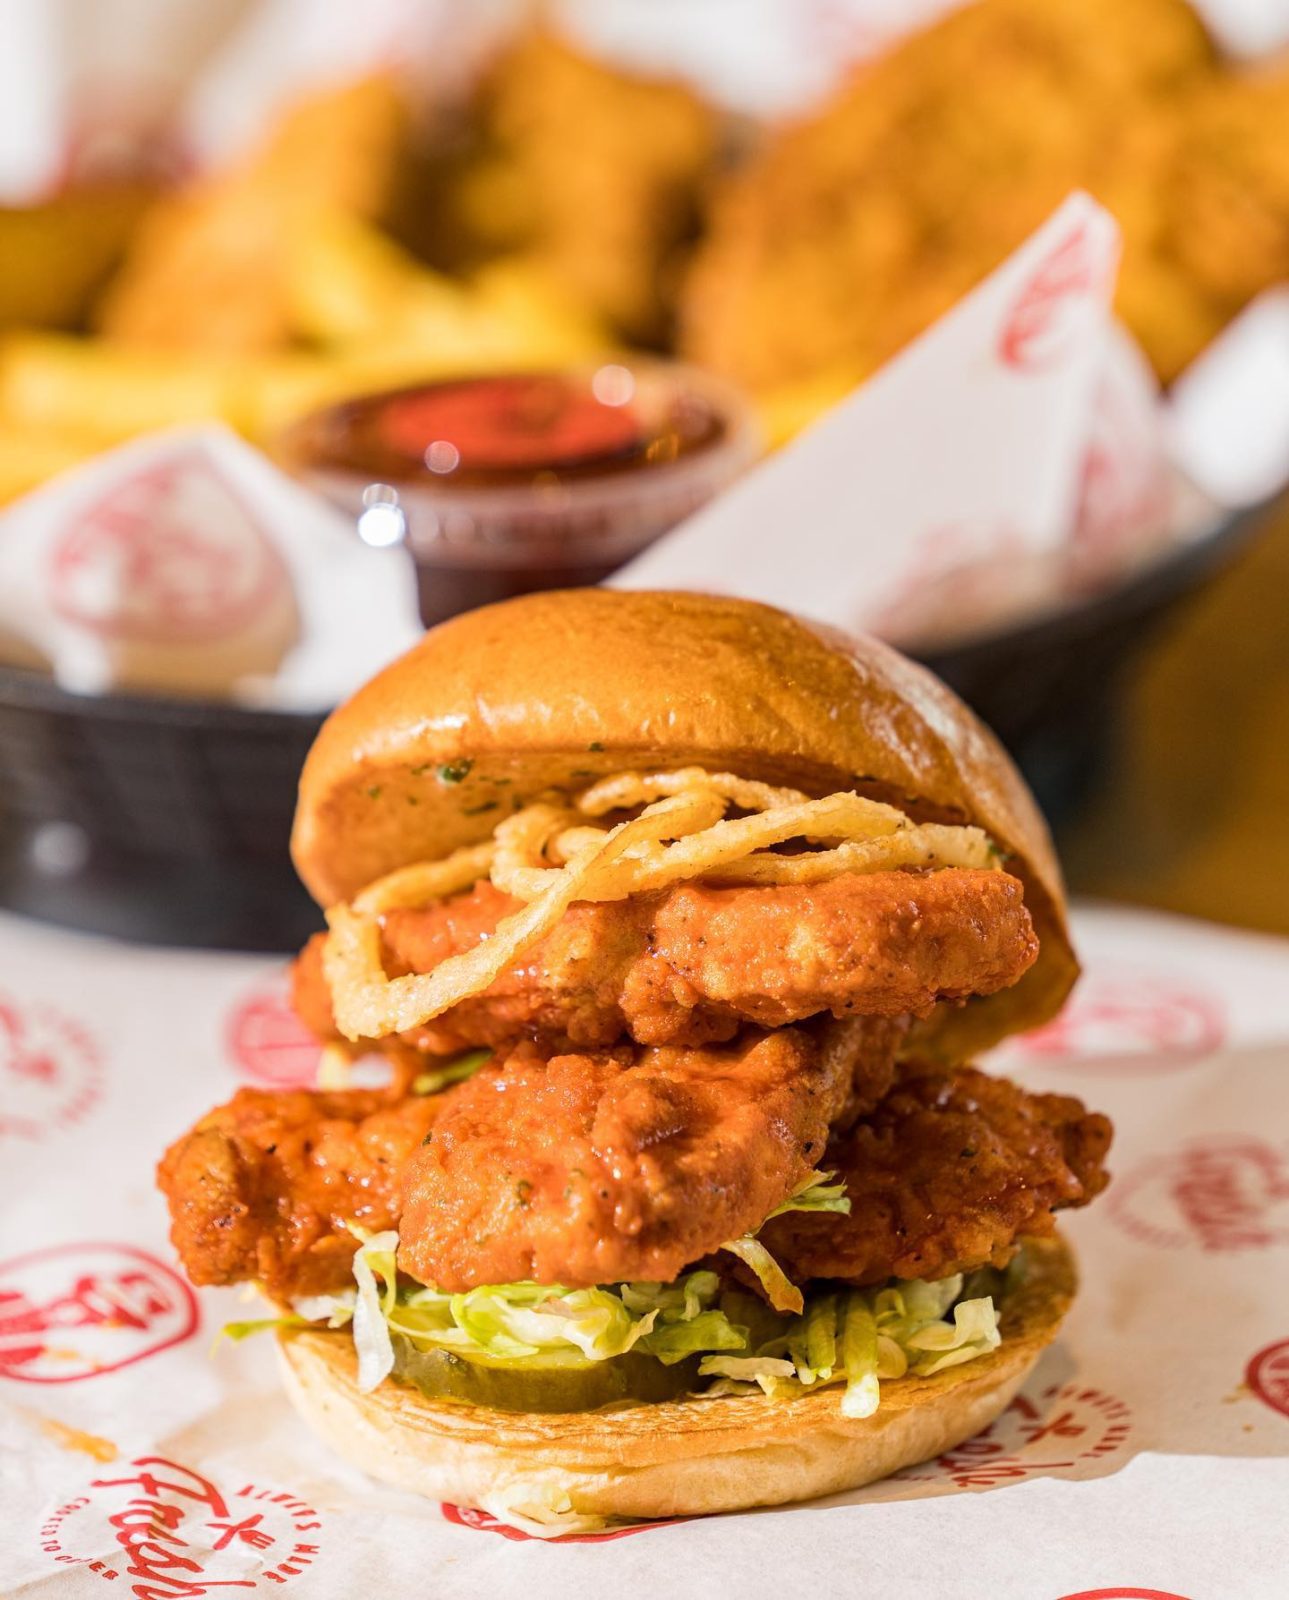 A new fried chicken restaurant selling gravy mayo is opening in Manchester, The Manc